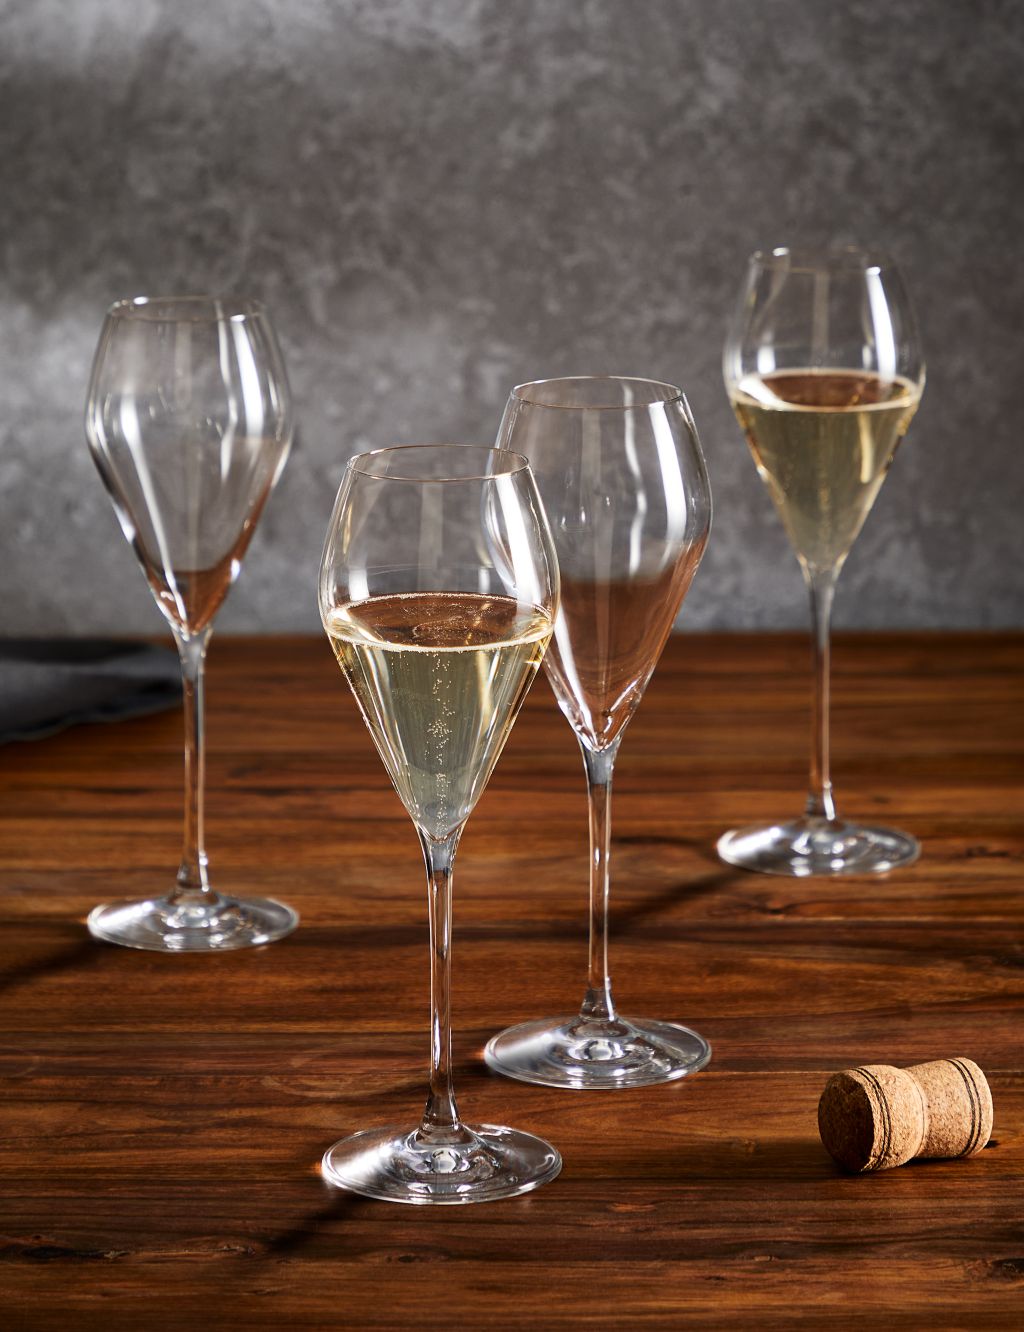 Dash of That Stemless Champagne Glassware Set - 4 Pack - Clear, 4